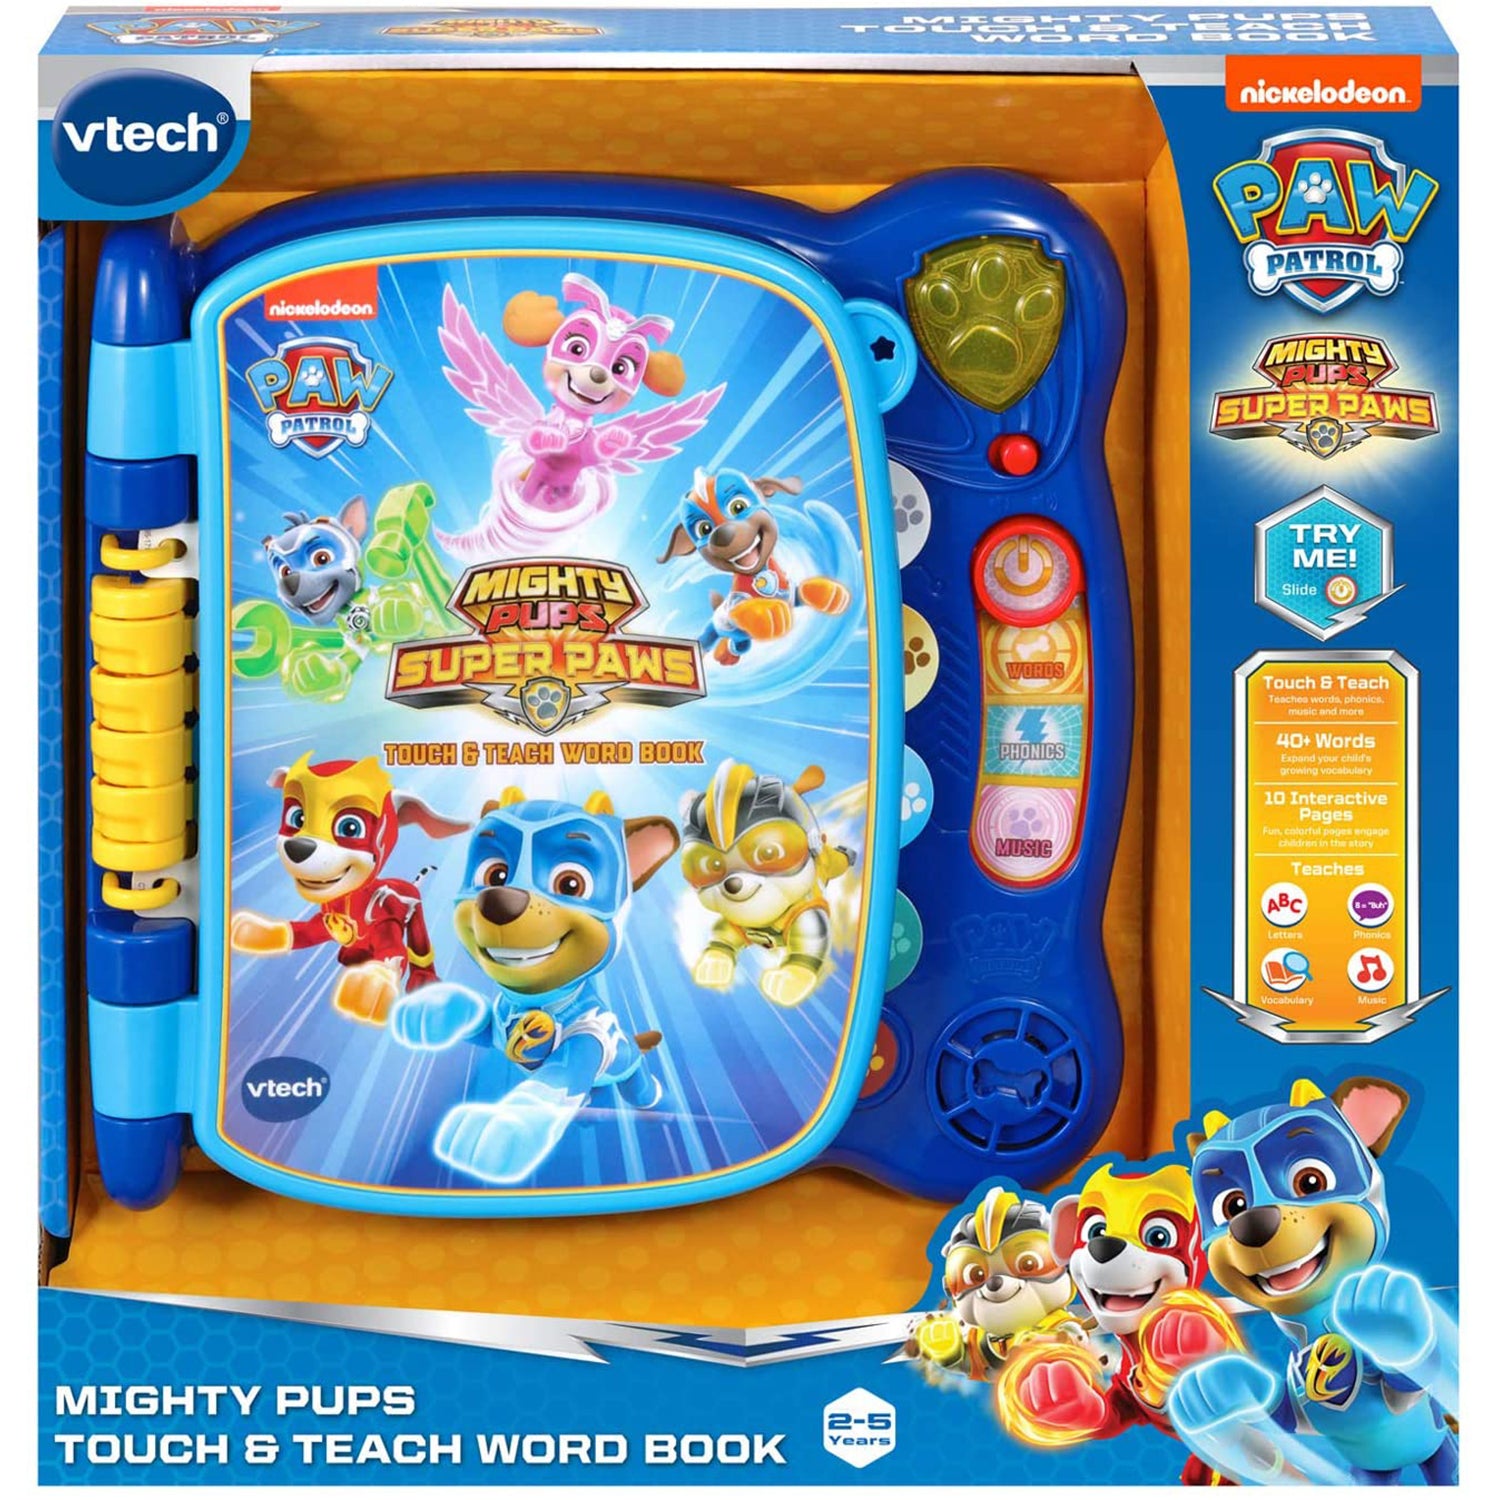 VTech PAW Patrol Mighty Pups Touch & Teach Word Book (English Version)